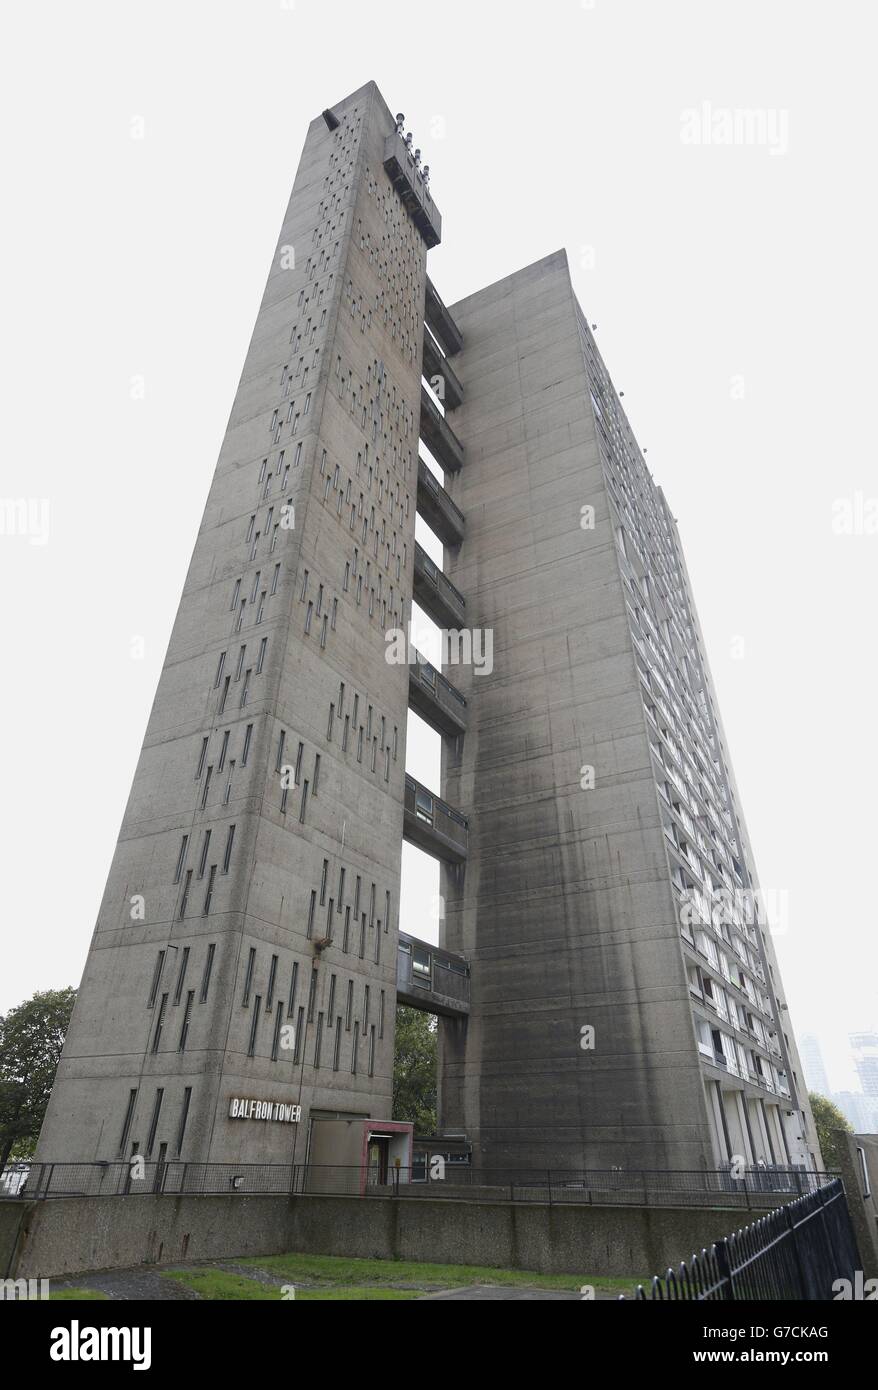 Balfron Tower, St. Leonard's Road, Poplar, London, as the National Trust have furnished Flat 130, where architect Erno Goldfinger lived for two months in 1968, as it would have appeared at the time. Stock Photo